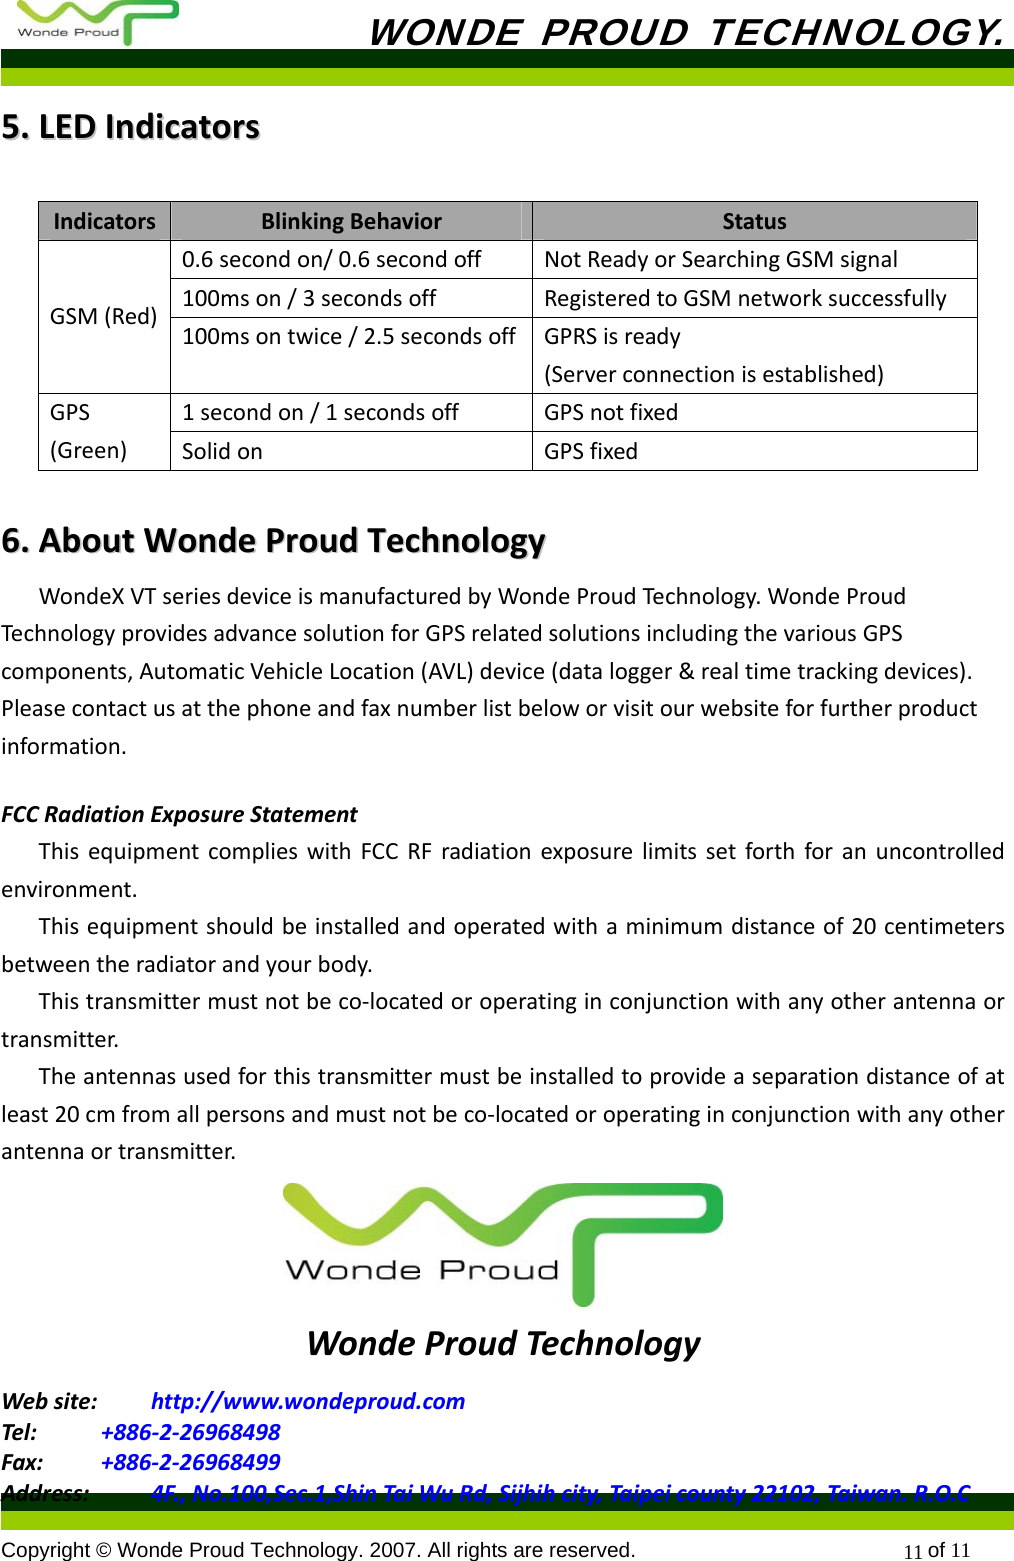           WONDE PROUD TECHNOLOGY.  Copyright © Wonde Proud Technology. 2007. All rights are reserved.                            of 11 1155..LLEEDDIInnddiiccaattoorrssIndicatorsBlinkingBehaviorStatus0.6secondon/0.6secondoffNotReadyorSearchingGSMsignal100mson/3secondsoffRegisteredtoGSMnetworksuccessfullyGSM(Red)100msontwice/2.5secondsoffGPRSisready(Serverconnectionisestablished)1secondon/1secondsoffGPSnotfixedGPS(Green)SolidonGPSfixed66..  AAbboouuttWWoonnddeePPrroouuddTTeecchhnnoollooggyyWondeXVTseriesdeviceismanufacturedbyWondeProudTechnology.WondeProudTechnologyprovidesadvancesolutionforGPSrelatedsolutionsincludingthevariousGPScomponents,AutomaticVehicleLocation(AVL)device(datalogger&amp;realtimetrackingdevices).Pleasecontactusatthephoneandfaxnumberlistbeloworvisitourwebsiteforfurtherproductinformation.FCCRadiationExposureStatementThisequipmentcomplieswithFCCRFradiationexposurelimitssetforthforanuncontrolledenvironment.Thisequipmentshouldbeinstalledandoperatedwithaminimumdistanceof20centimetersbetweentheradiatorandyourbody.Thistransmittermustnotbeco‐locatedoroperatinginconjunctionwithanyotherantennaortransmitter.Theantennasusedforthistransmittermustbeinstalledtoprovideaseparationdistanceofatleast20cmfromallpersonsandmustnotbeco‐locatedoroperatinginconjunctionwithanyotherantennaortransmitter.WondeProudTechnologyWebsite: http://www.wondeproud.comTel: +886‐2‐26968498Fax: +886‐2‐26968499Address: 4F.,No.100,Sec.1,ShinTaiWuRd,Sijhihcity,Taipeicounty22102,Taiwan.R.O.C